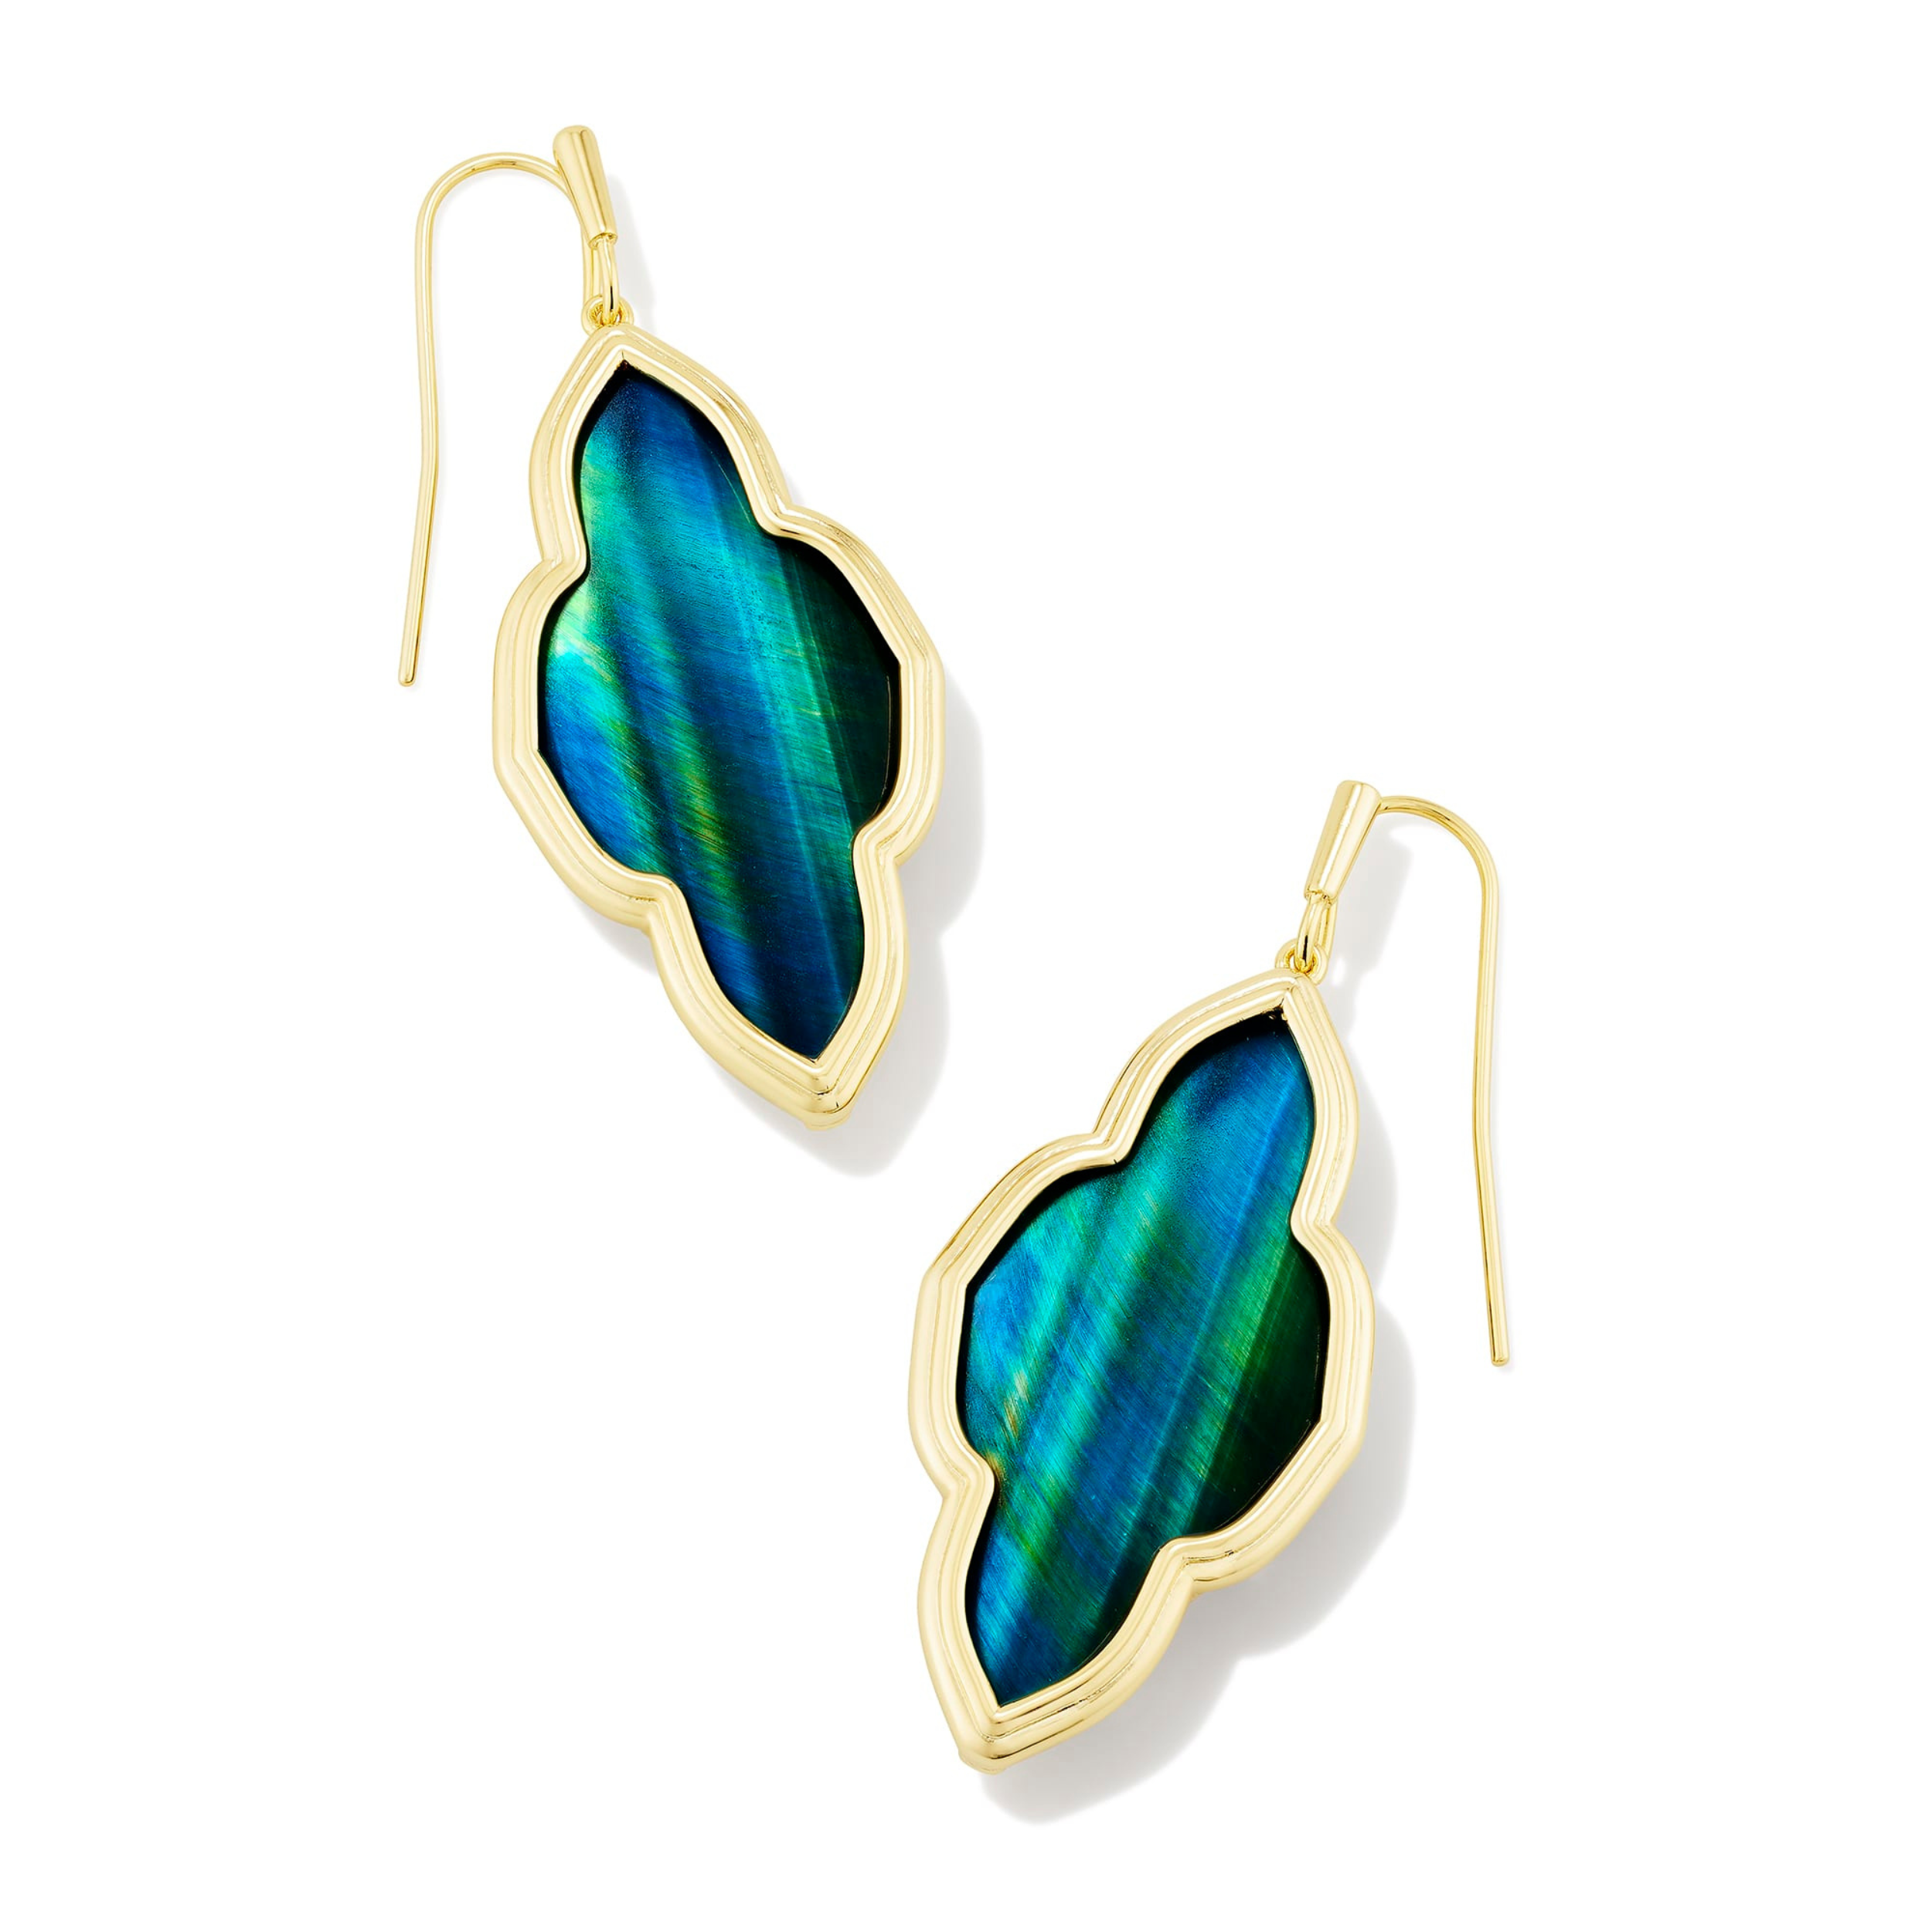 Pictured is a a pair of gold drop earrings in the abbie shape on a white background. These earrings include a gold outline with a teal tiger's eye stone.